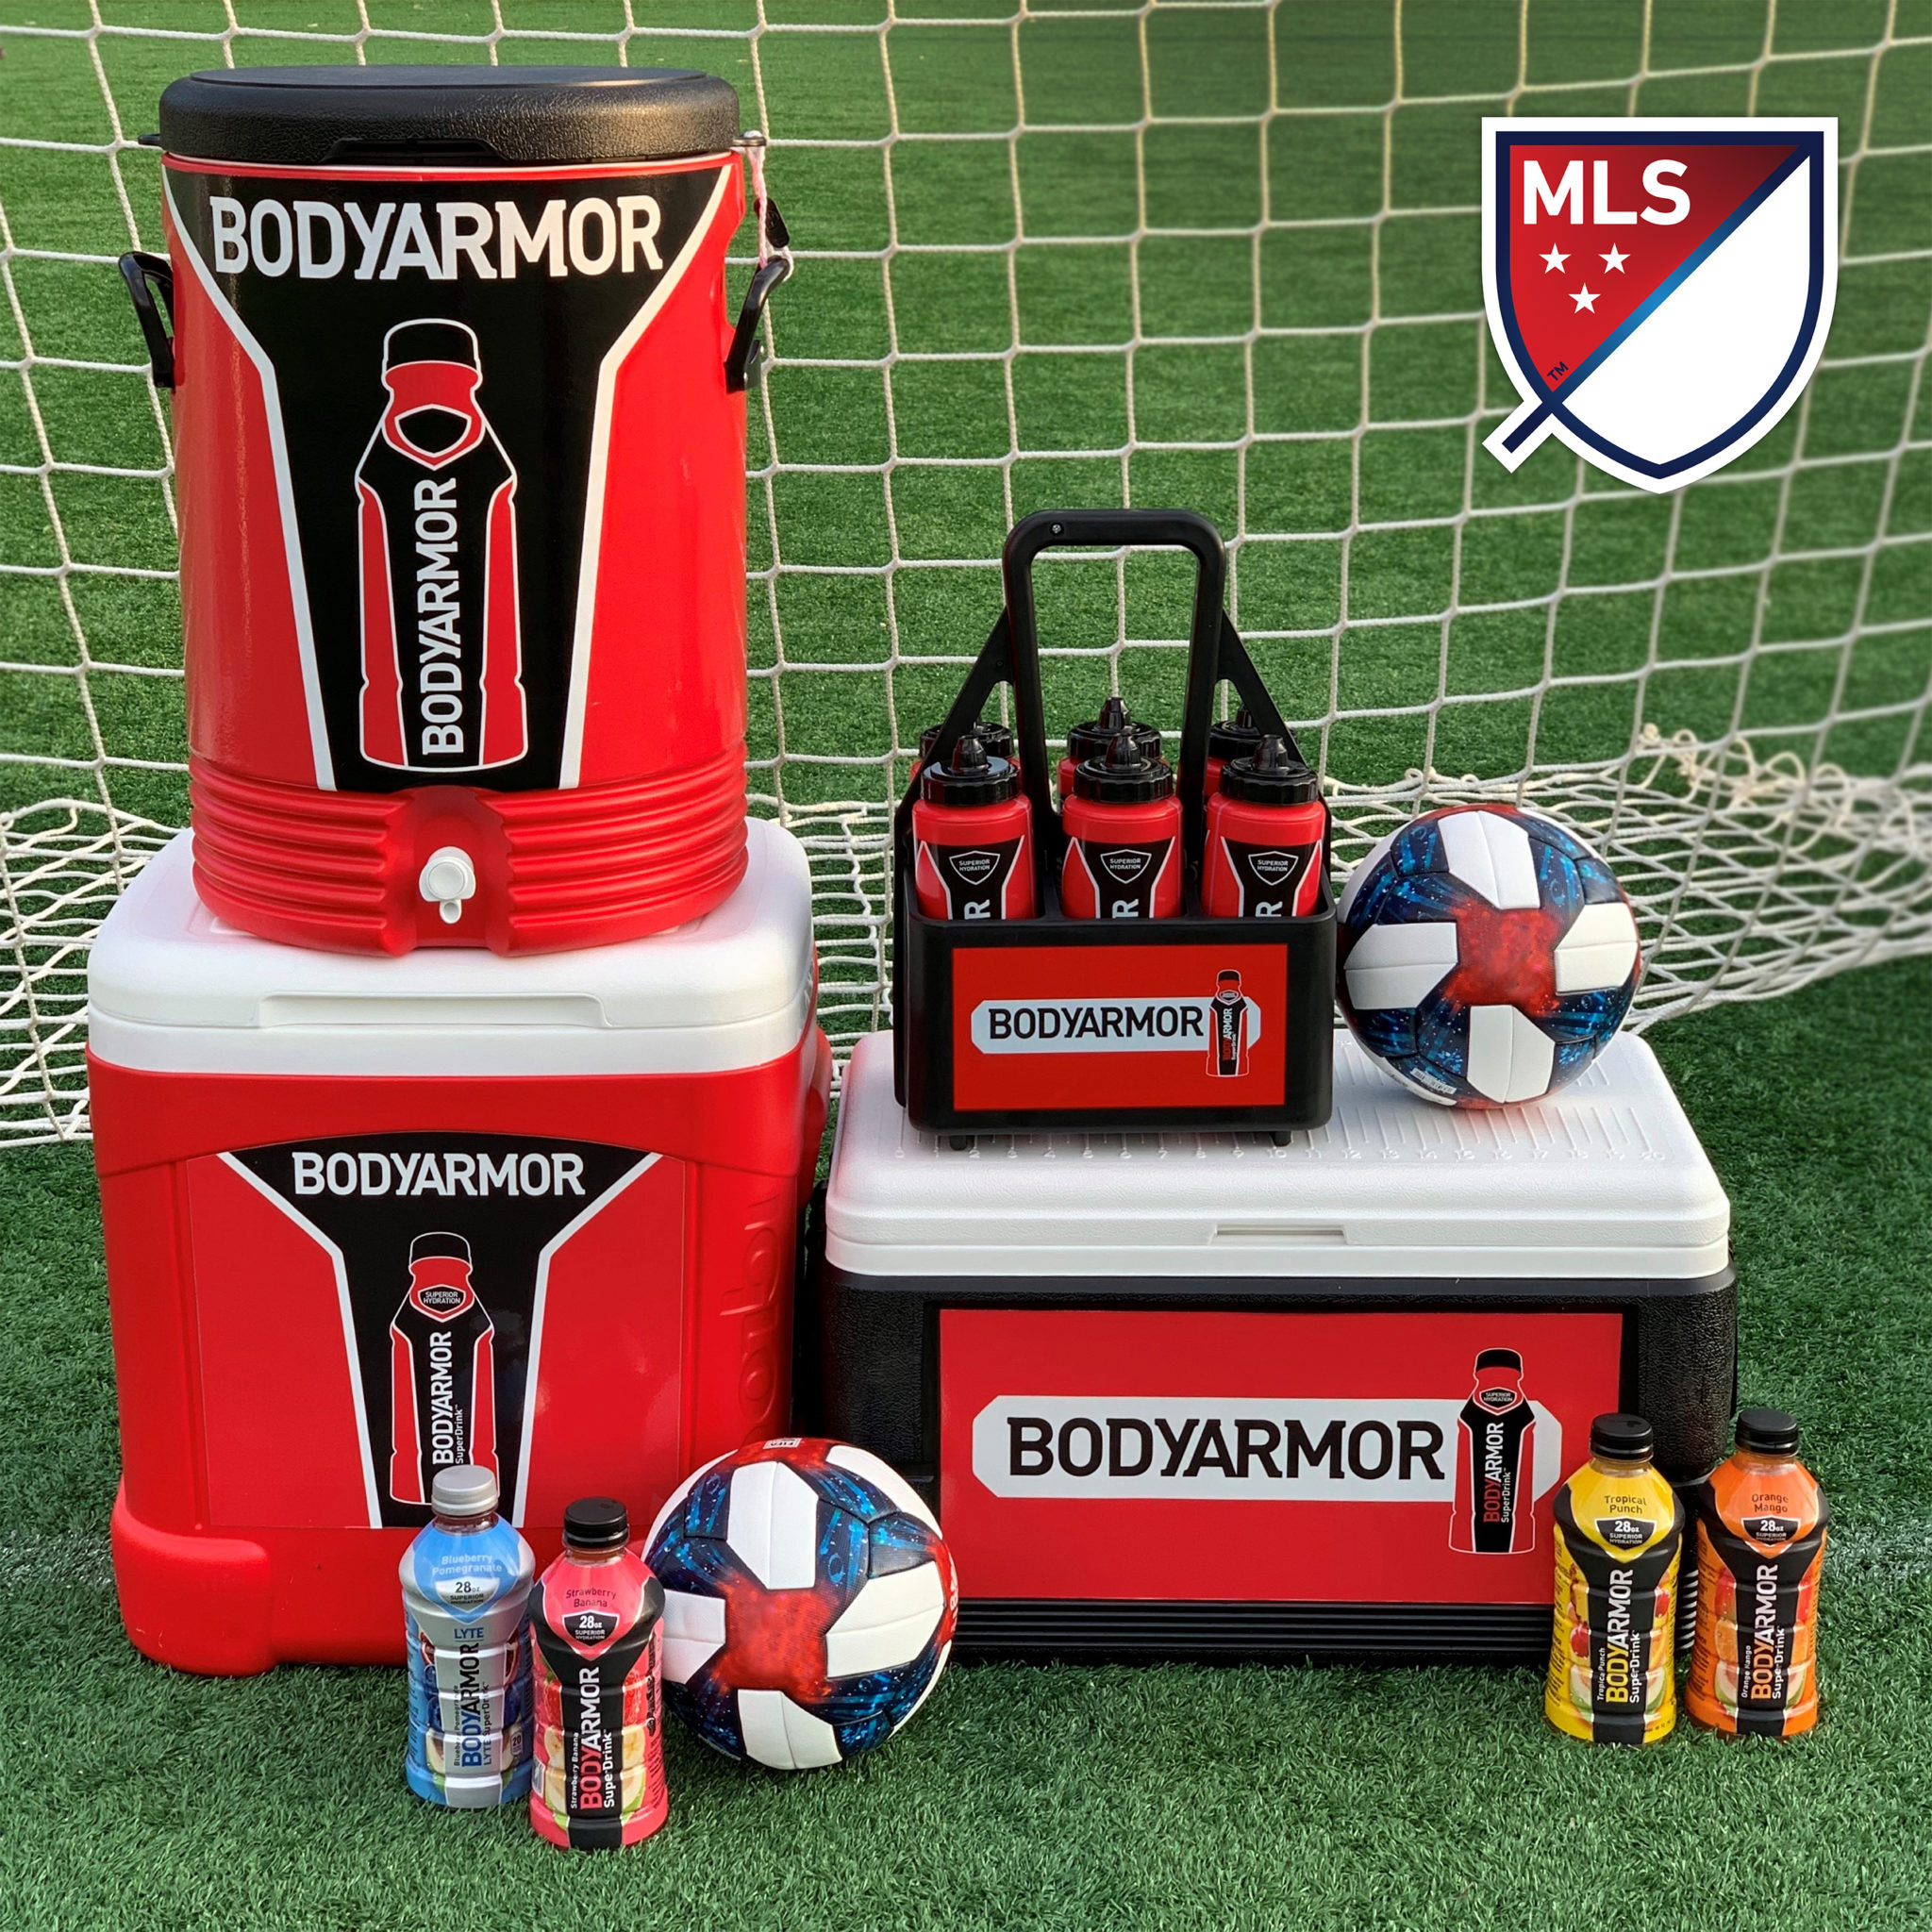 Major League Soccer taps BodyArmor as new official sports drink